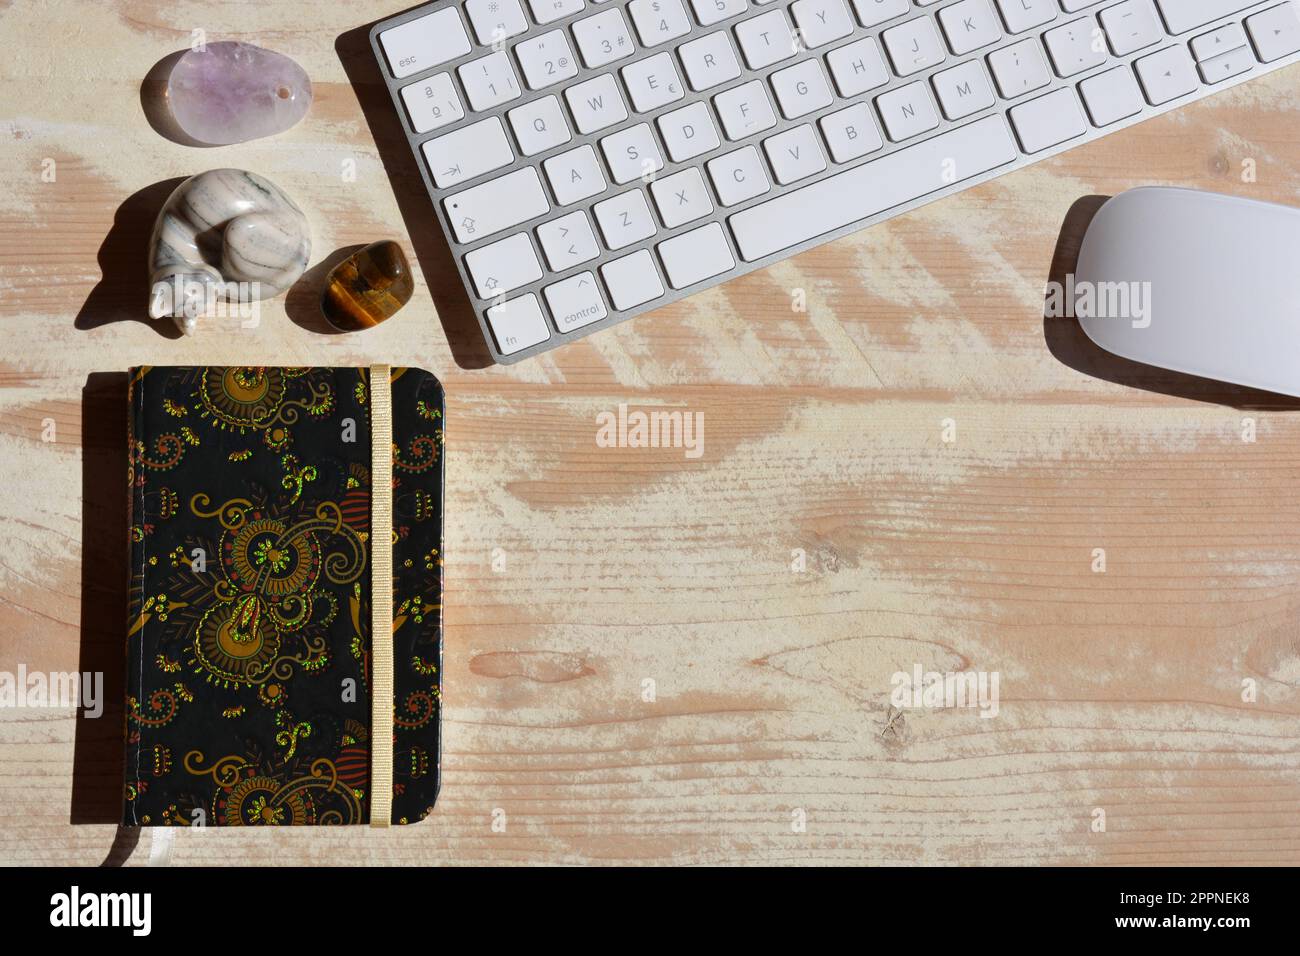 Desktop flat lay showing generic keyboard, mouse, notebook and ornaments with space for copy Stock Photo